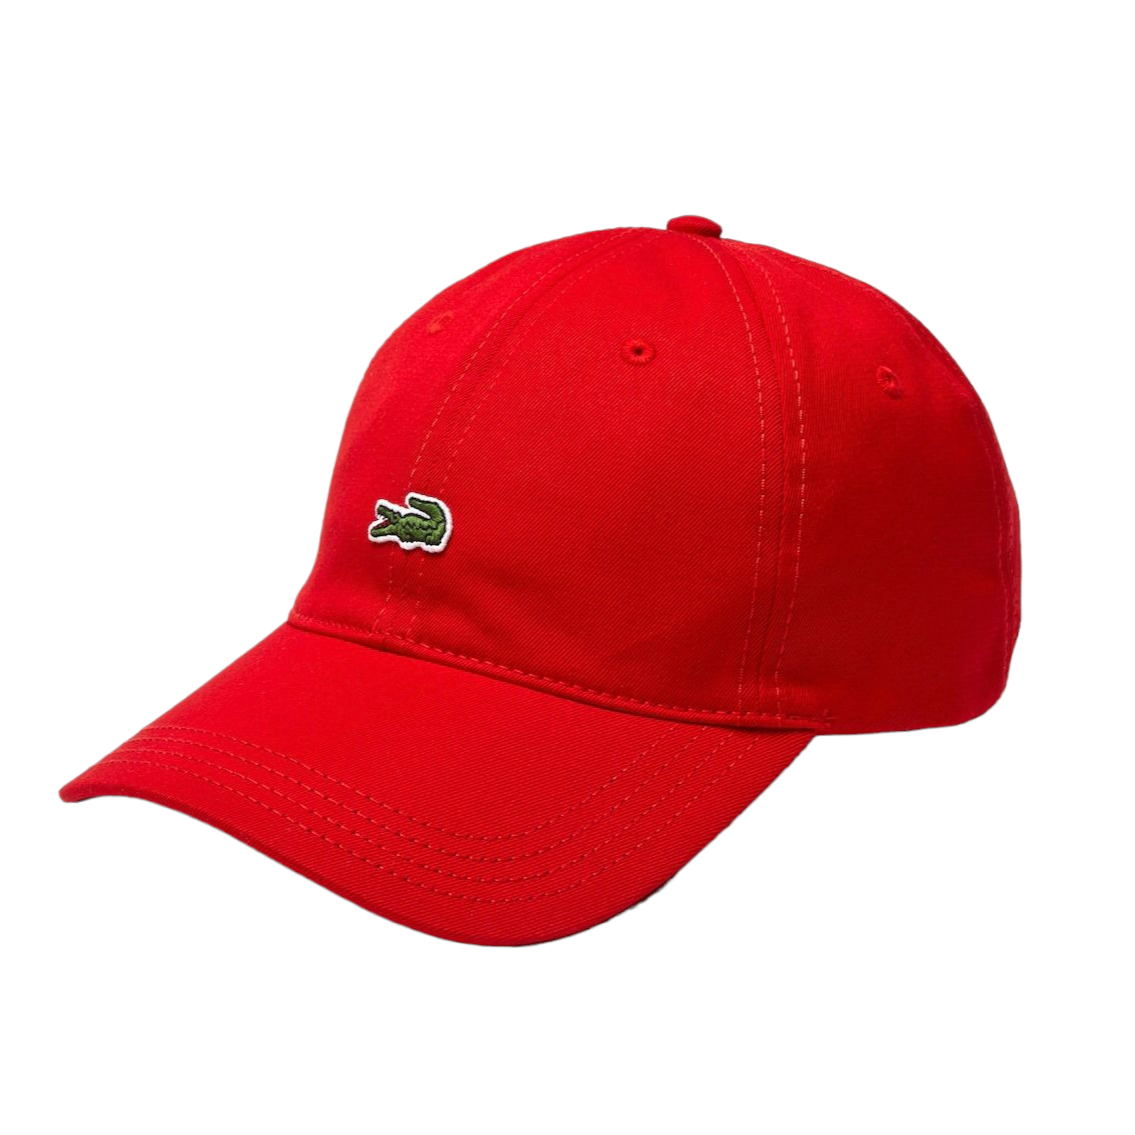 Lacoste png images